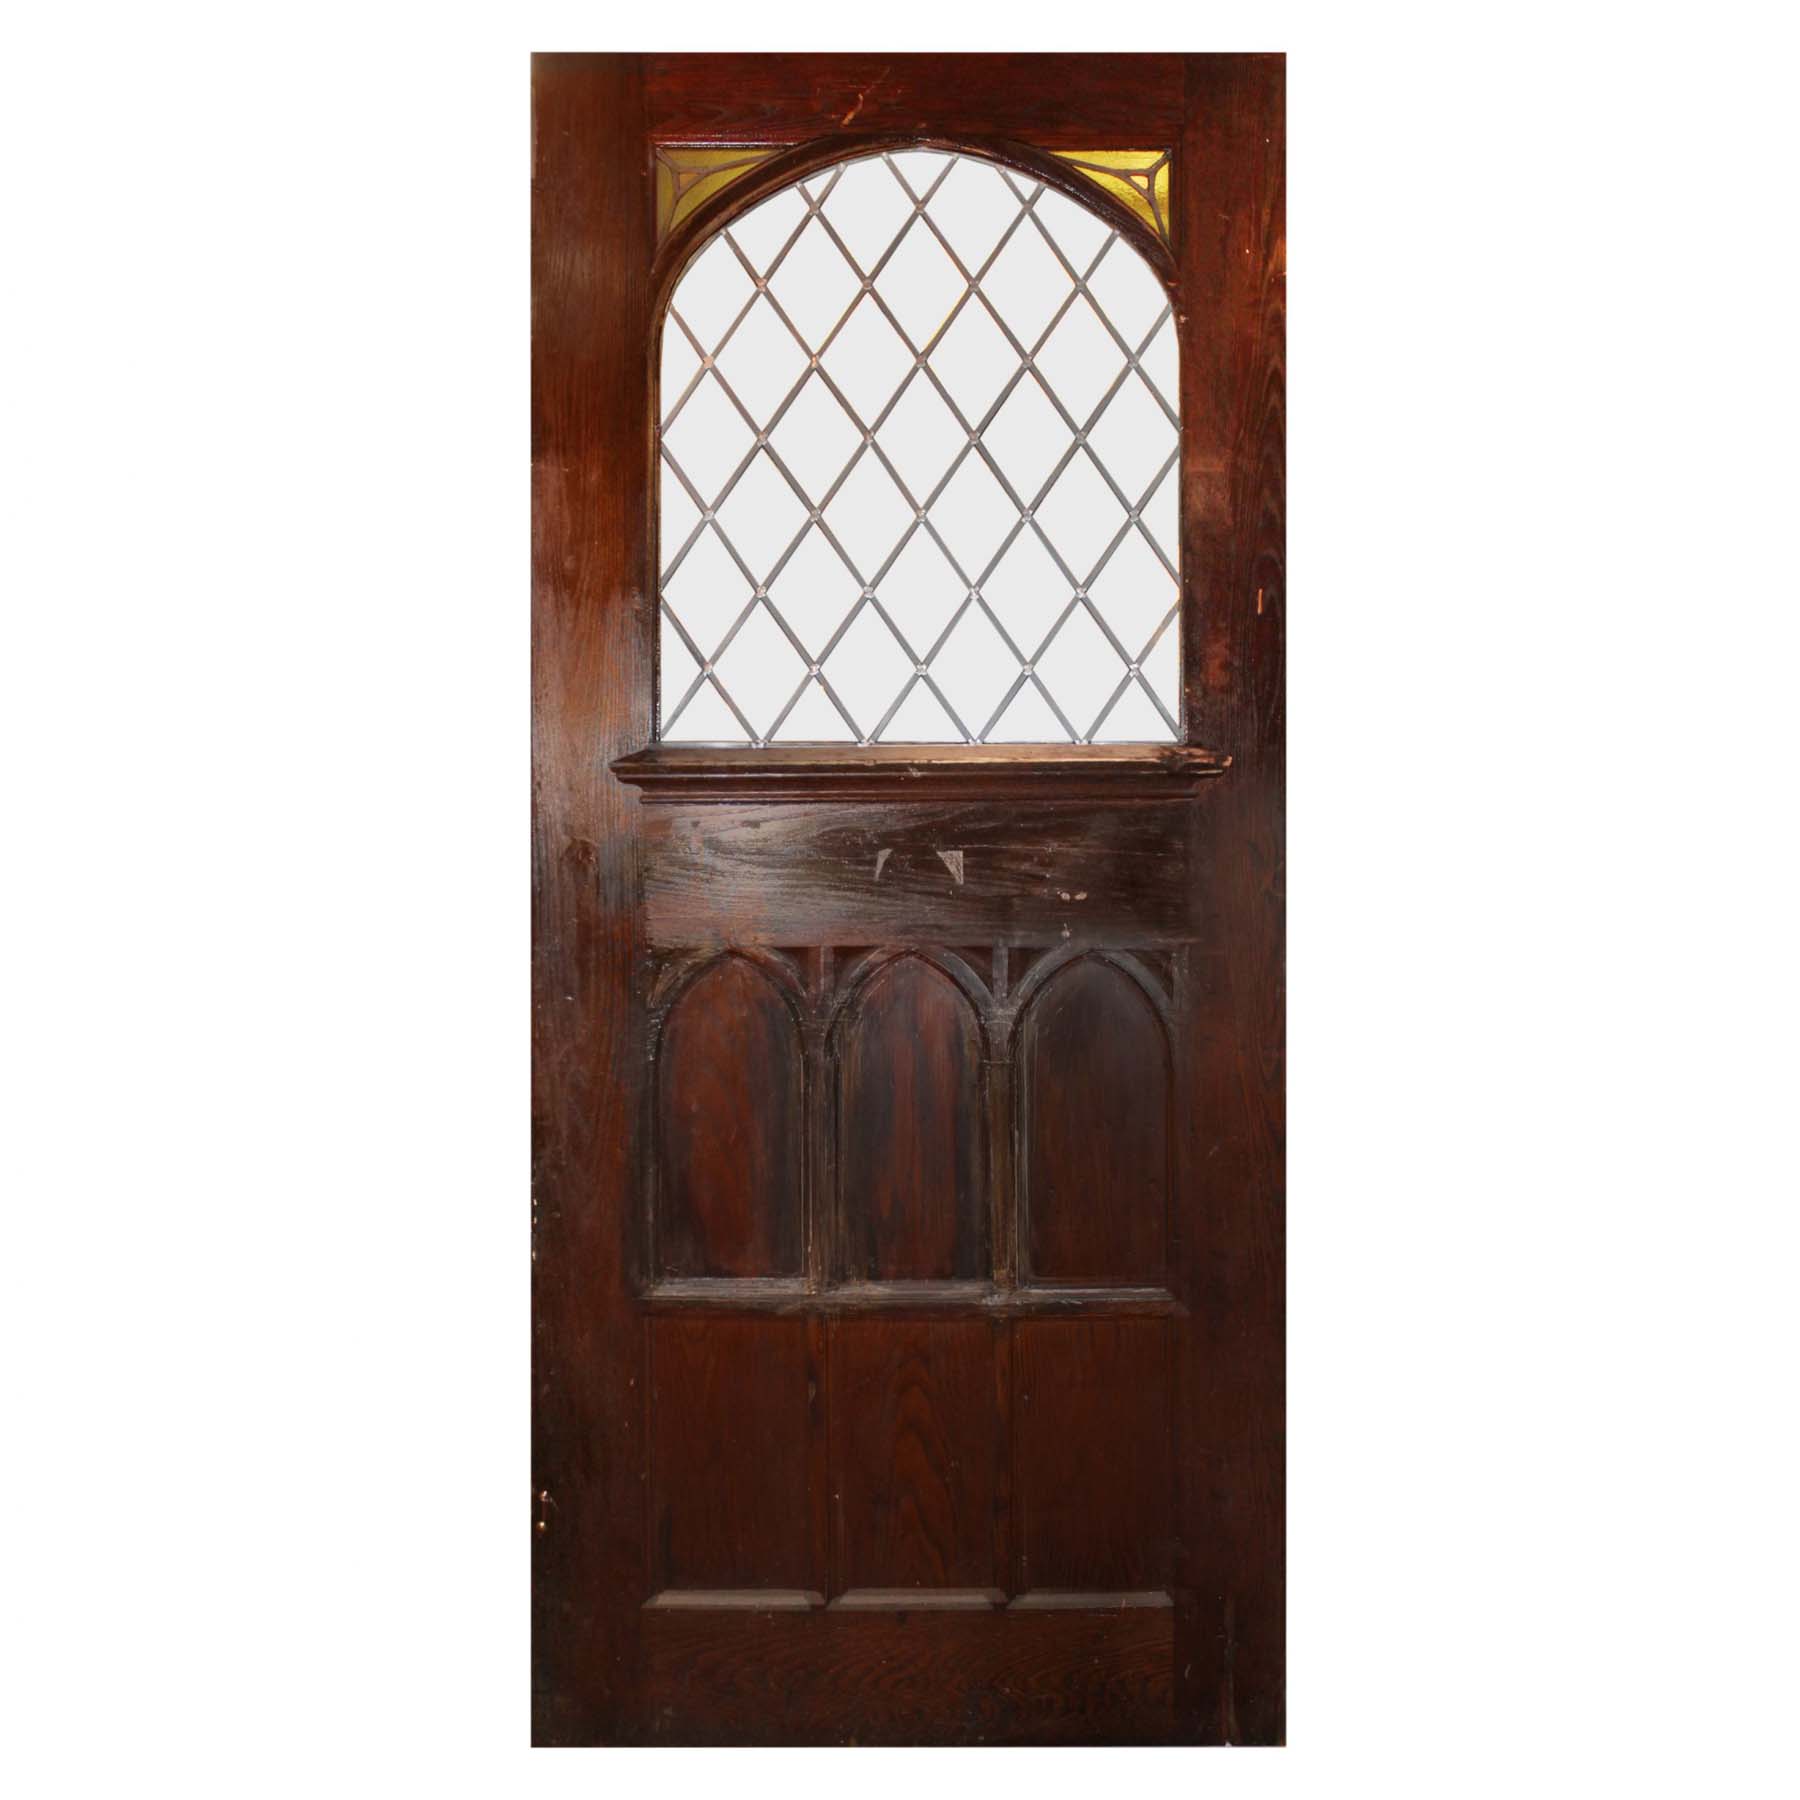 Large 48” Salvaged Oak Door with Gothic Arch Window-70330